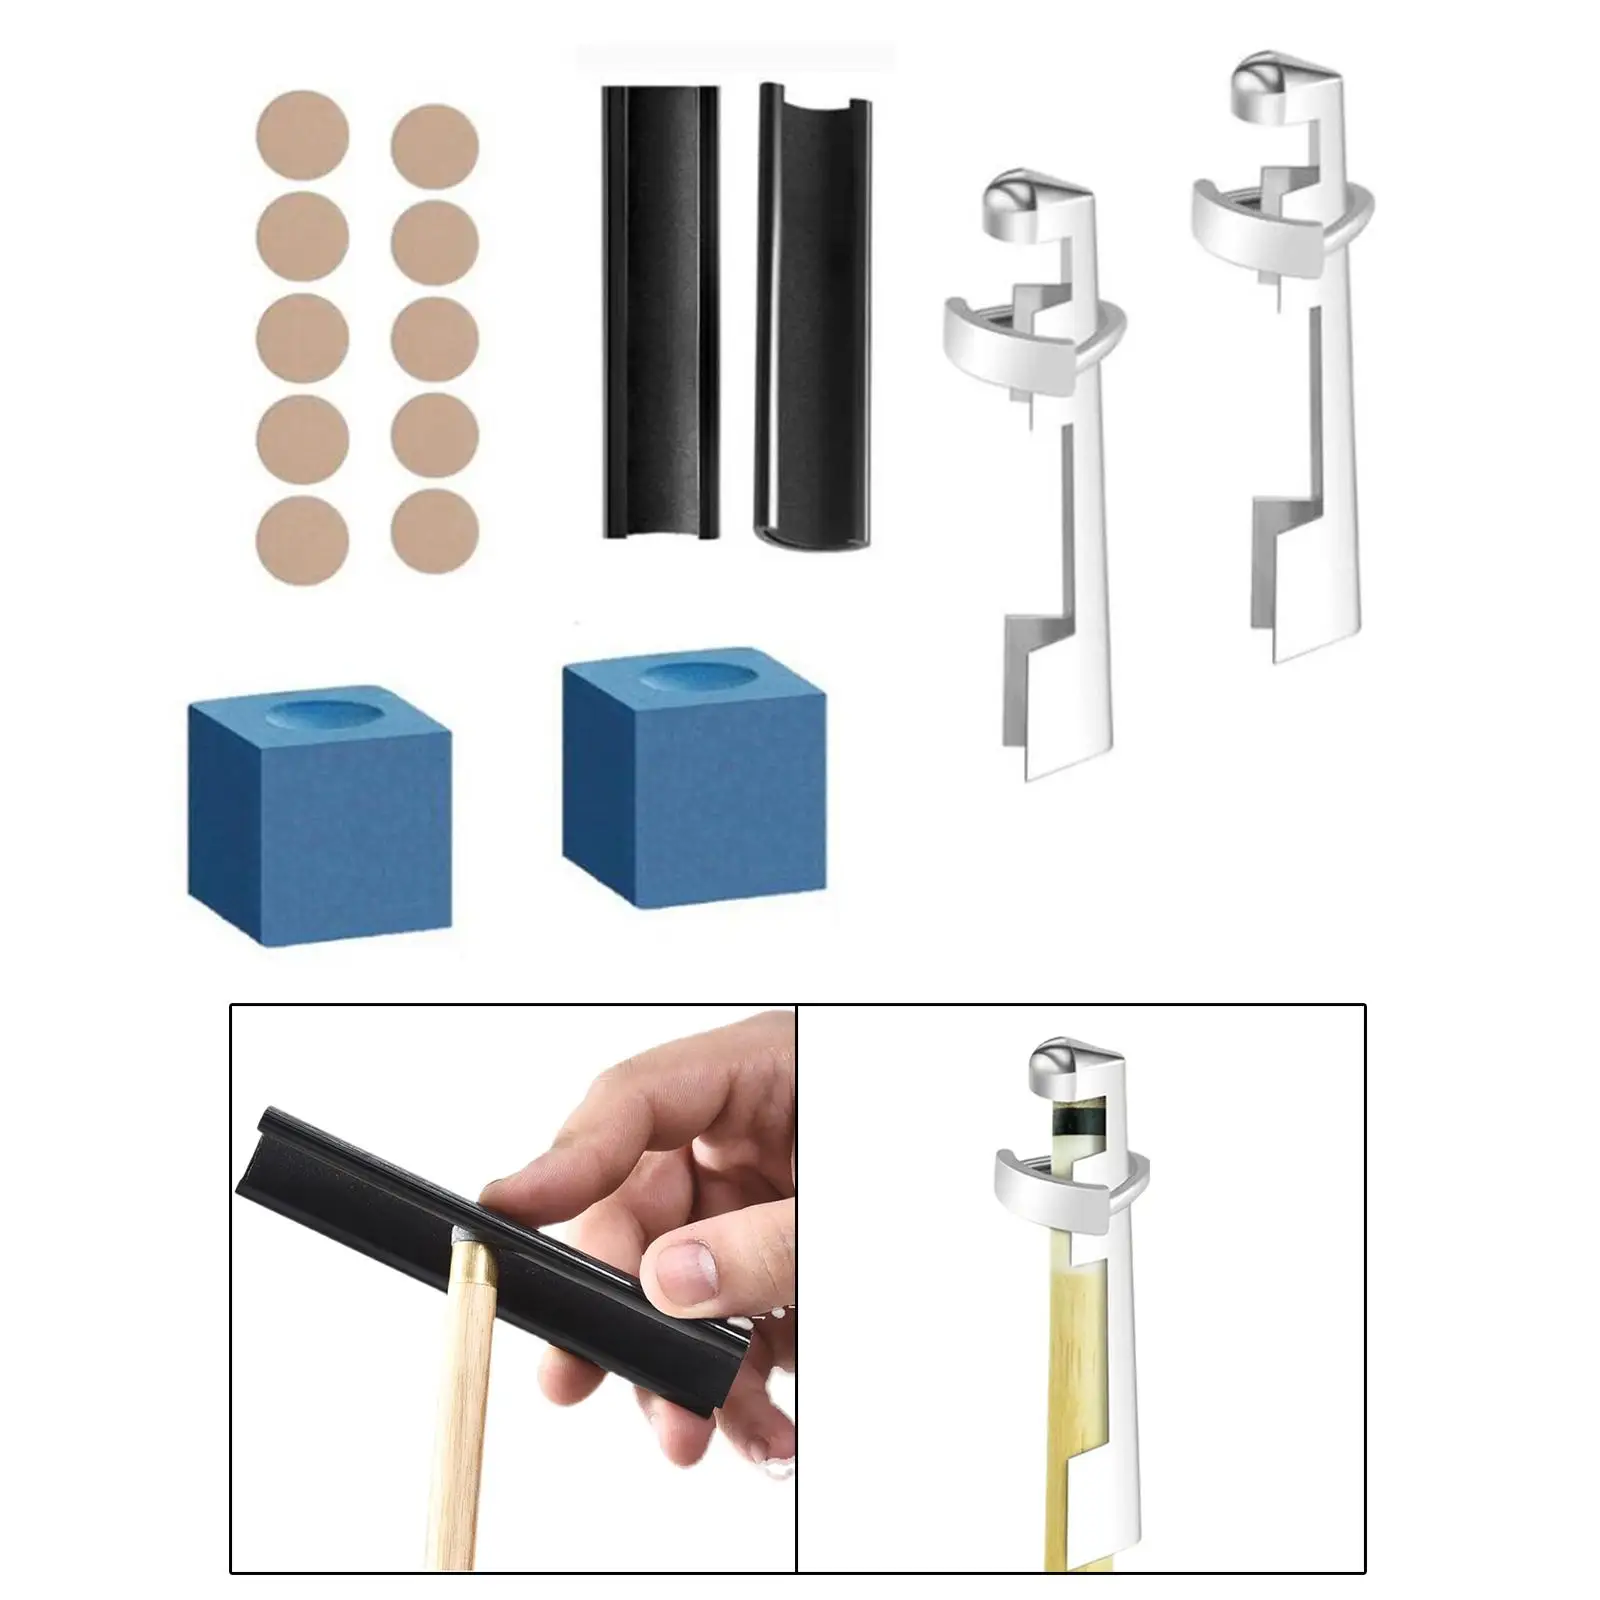 16x Snooker Cue Tip Repair Set Cue Tipping with Tip Clamp Accessories 